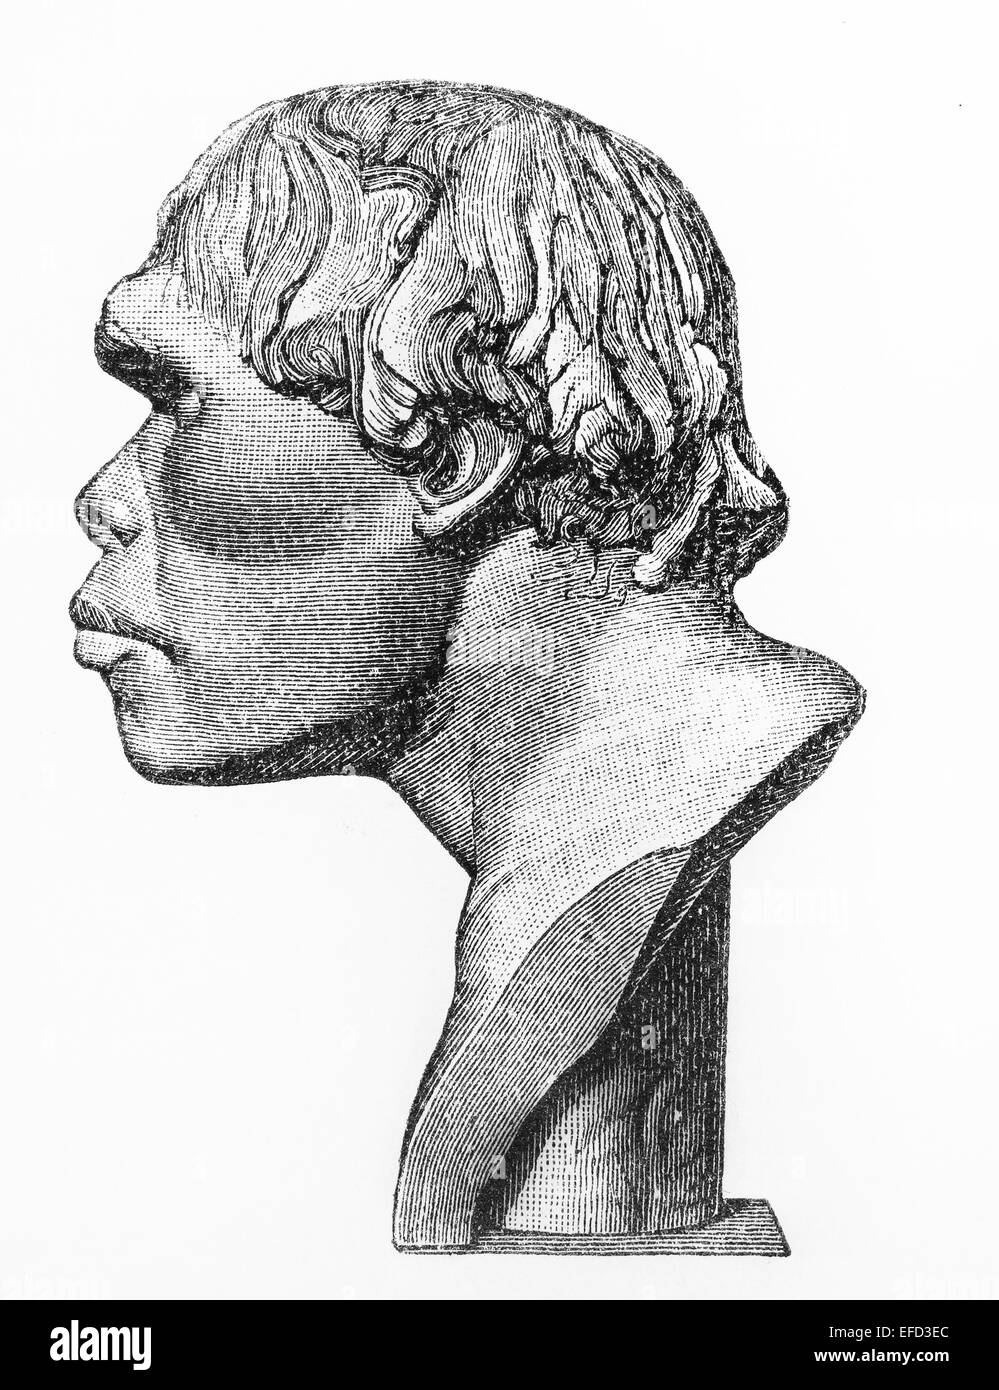 Vintage 19th century old drawing representing a Neanderthal human head Stock Photo